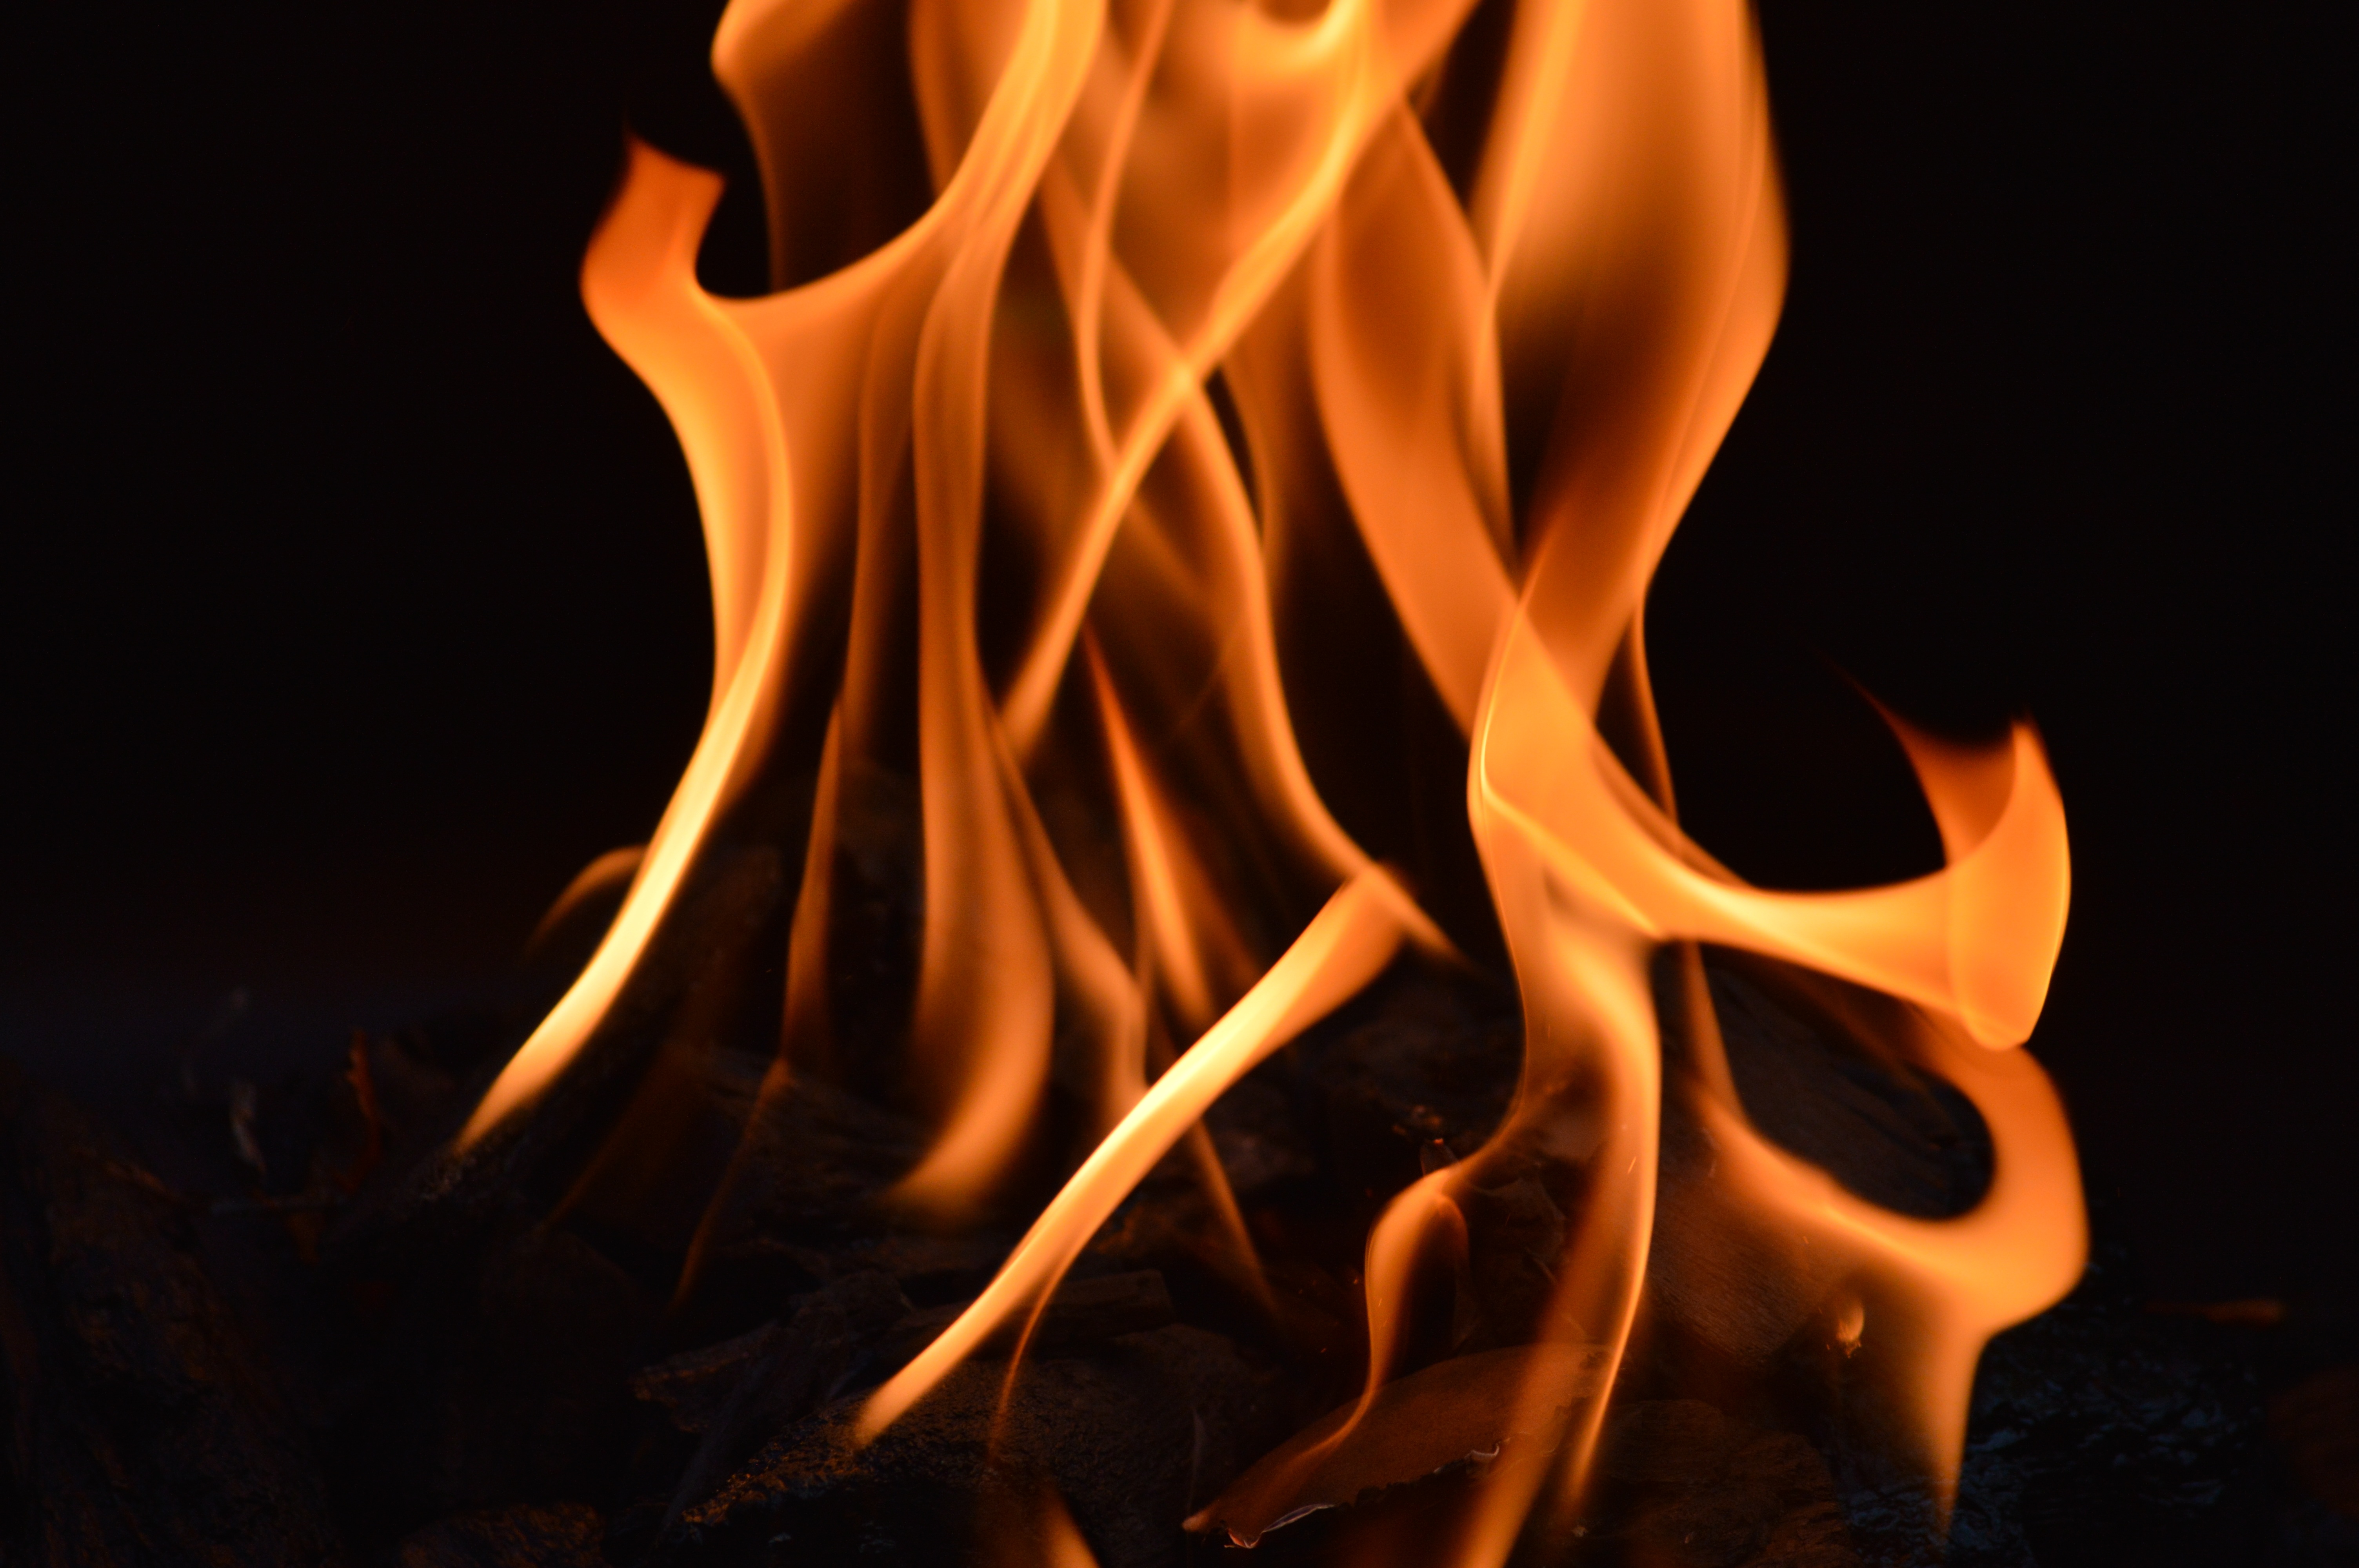 Free HD bonfire, fire, abstract, flame